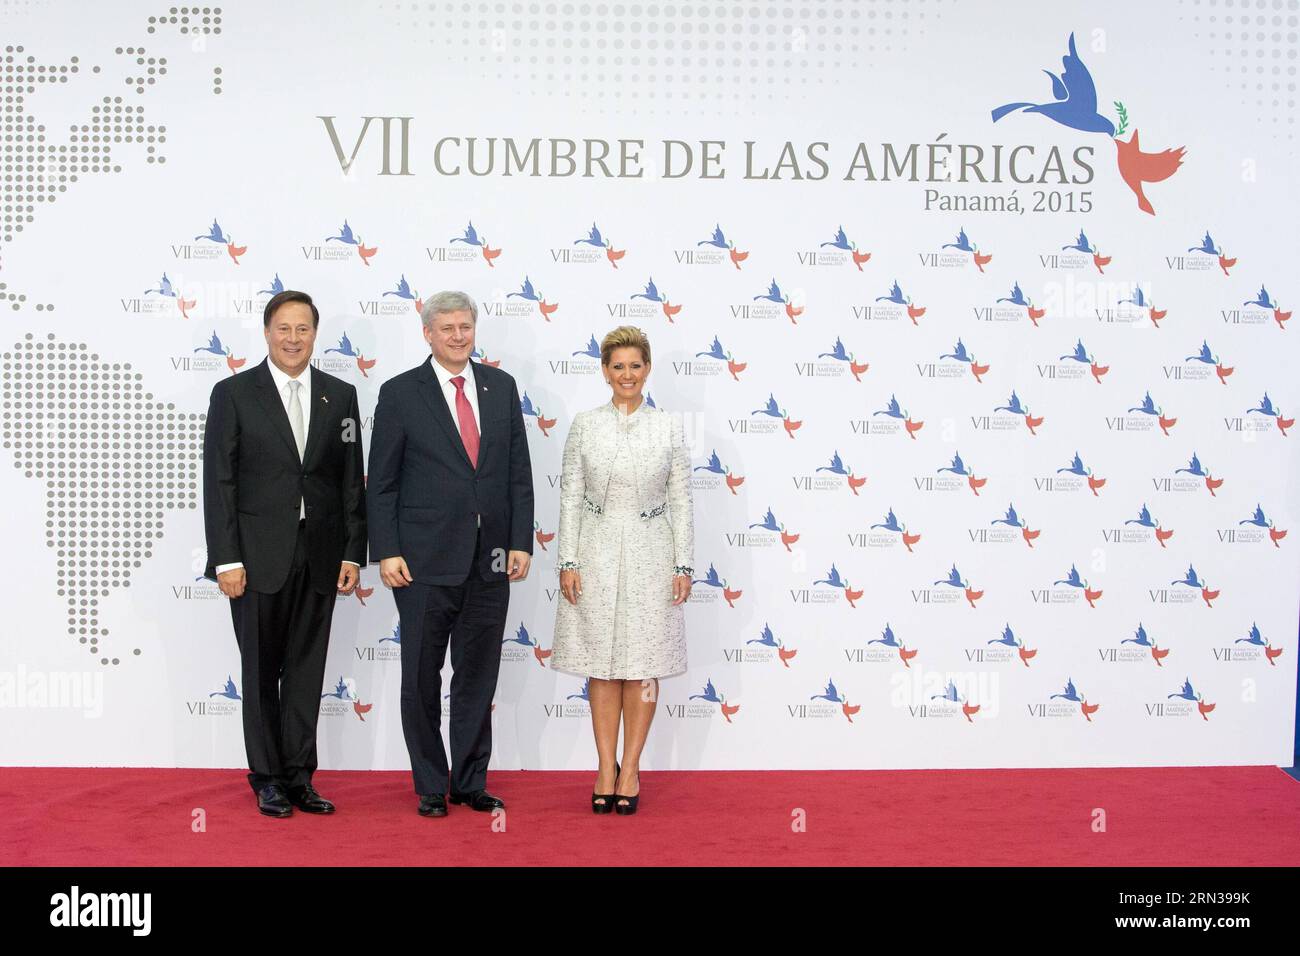 (150411) -- PANAMA CITY, April 10, 2015 -- President of Panama Juan Carlos Varela (1st L) welcomes Prime Minister of Canada Stephen Harper (C) upon his arrival for the Seventh Summit of the Americas in Panama City, capital of Panama, April 10, 2015. ) (zjy) PANAMA-PANAMA CITY-SUMMIT-WELCOMING CEREMONY XuxZijian PUBLICATIONxNOTxINxCHN   Panama City April 10 2015 President of Panama Juan Carlos Varela 1st l welcomes Prime Ministers of Canada Stephen Harper C UPON His Arrival for The Seventh Summit of The Americas in Panama City Capital of Panama April 10 2015  Panama Panama City Summit Welcoming Stock Photo